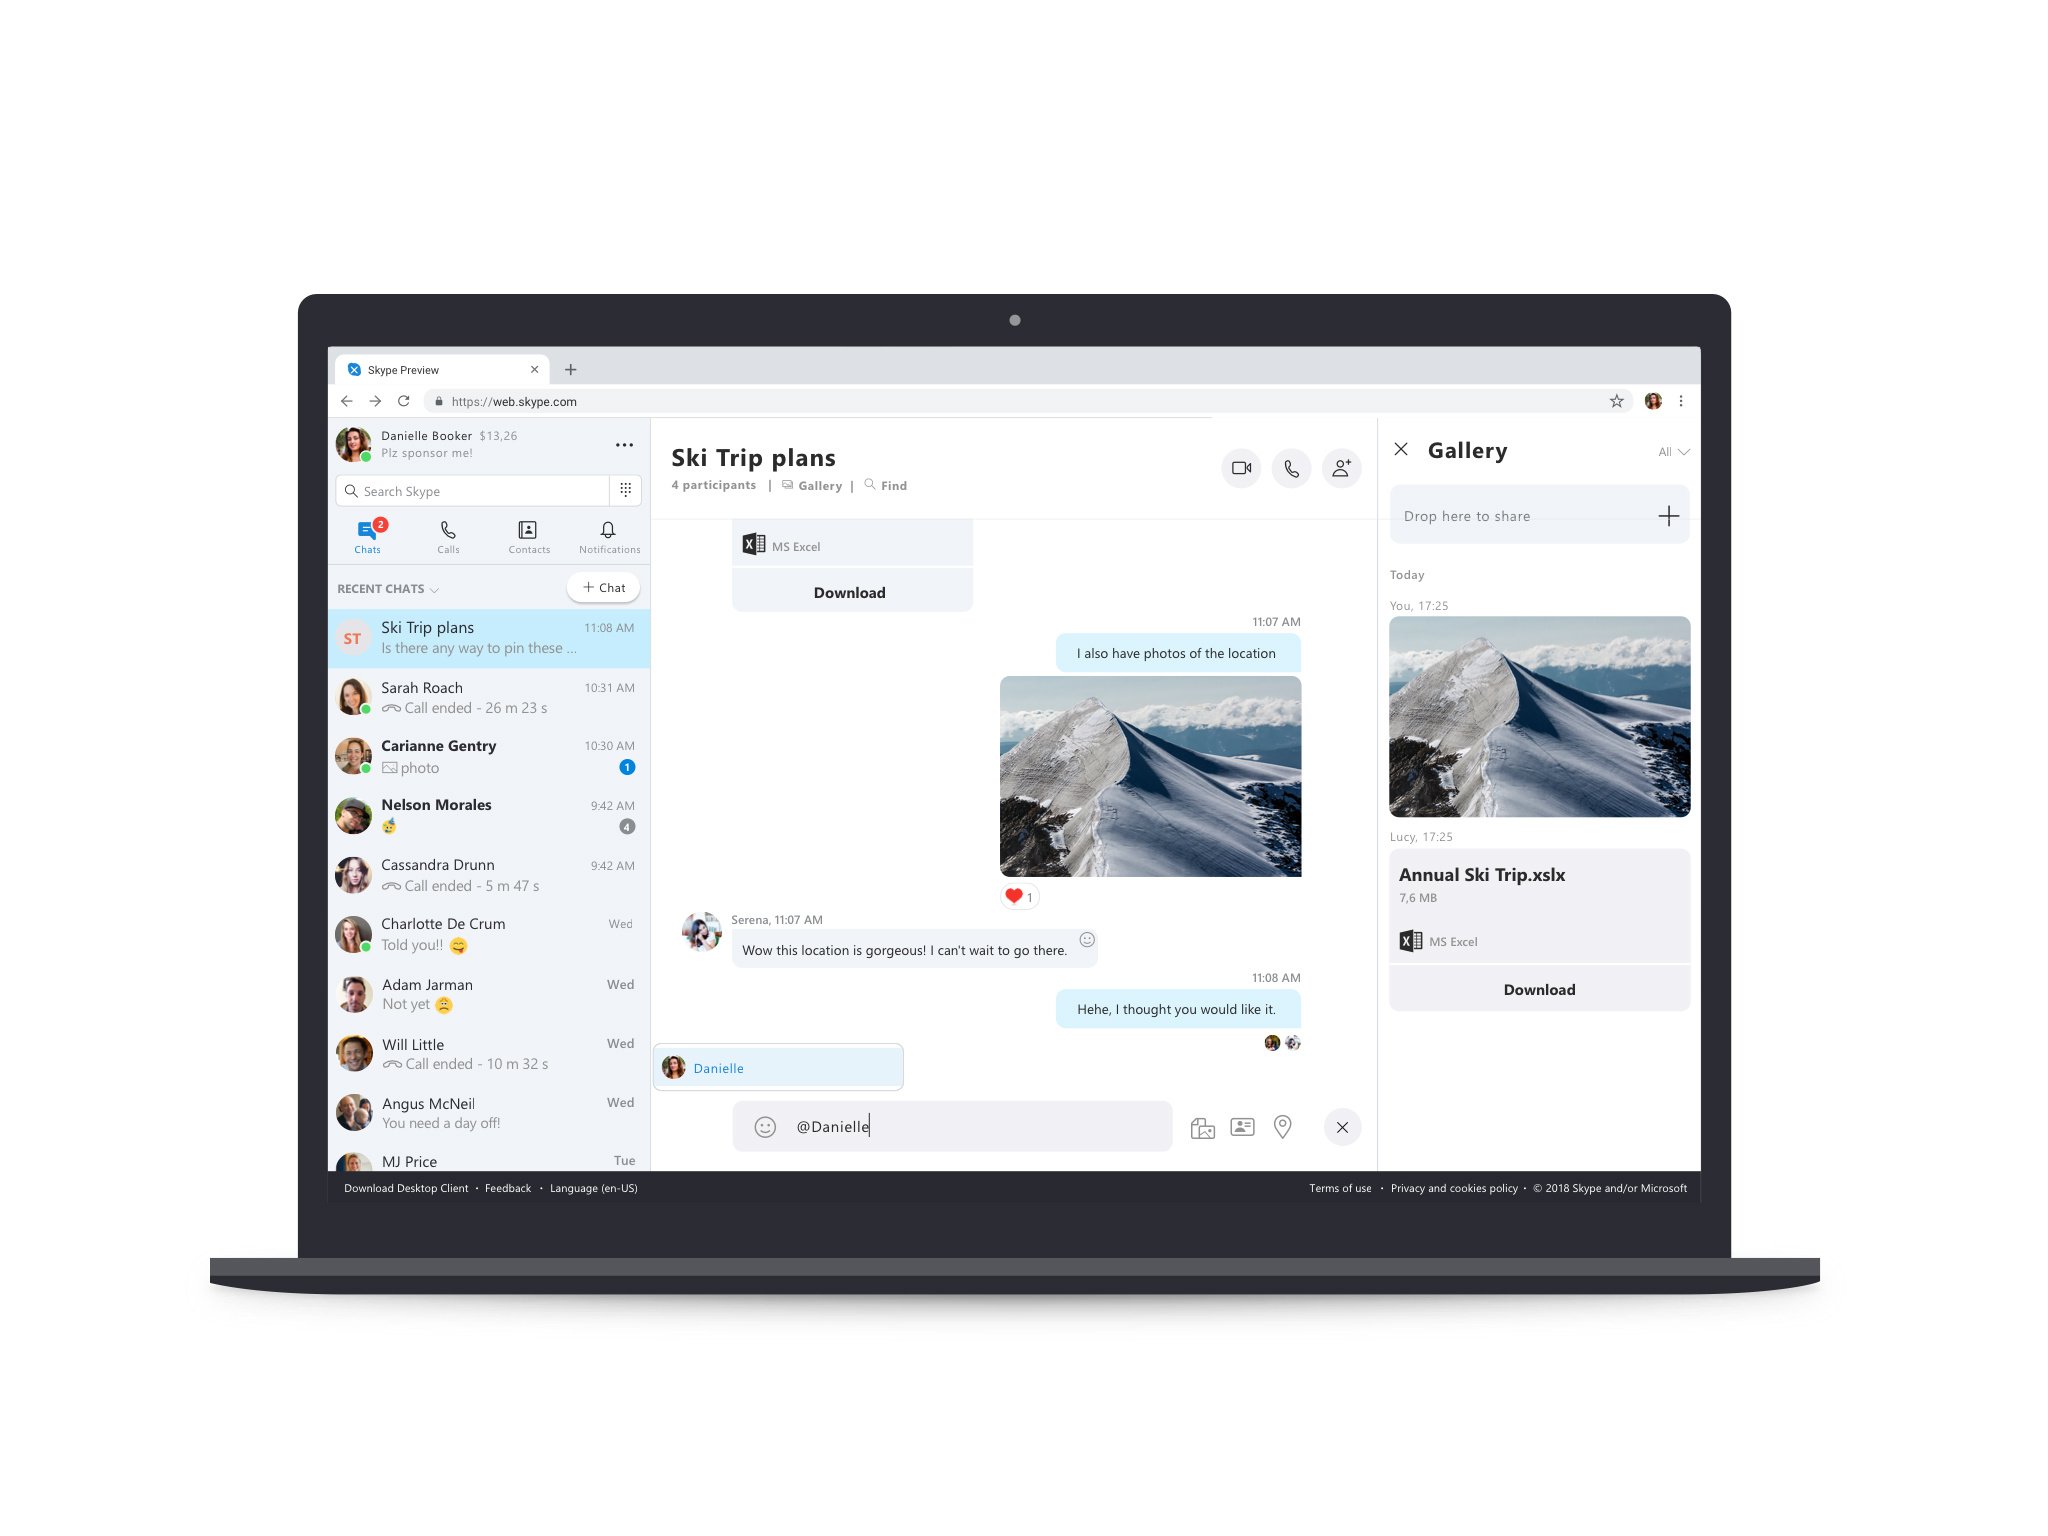 Microsoft launches refreshed Skype for the web